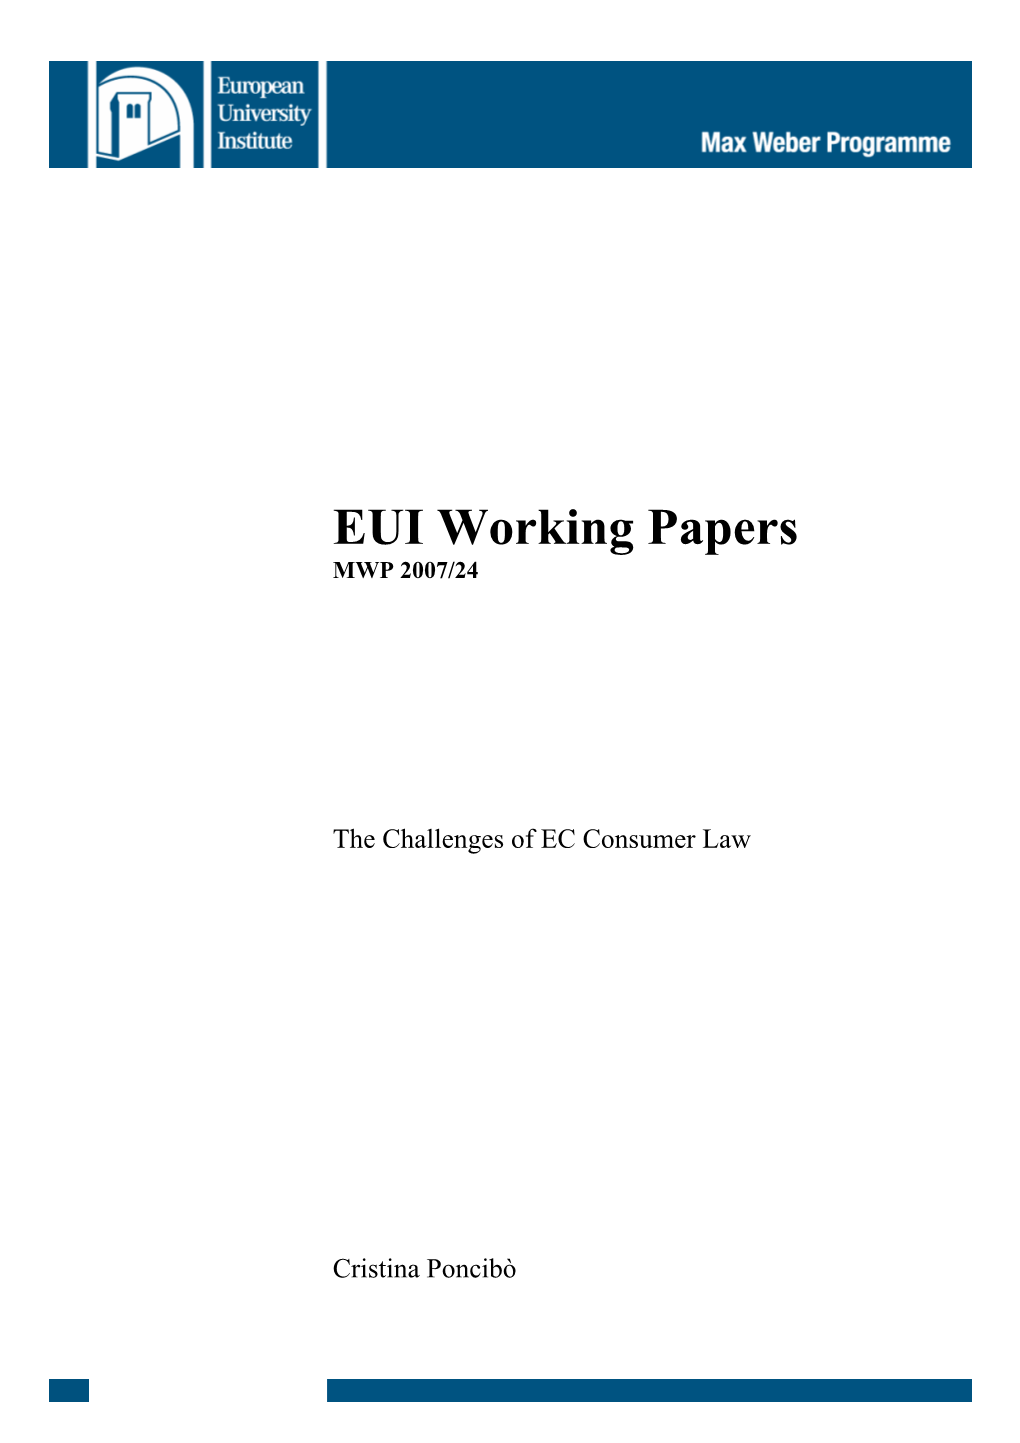 EUI Working Papers MWP 2007/24